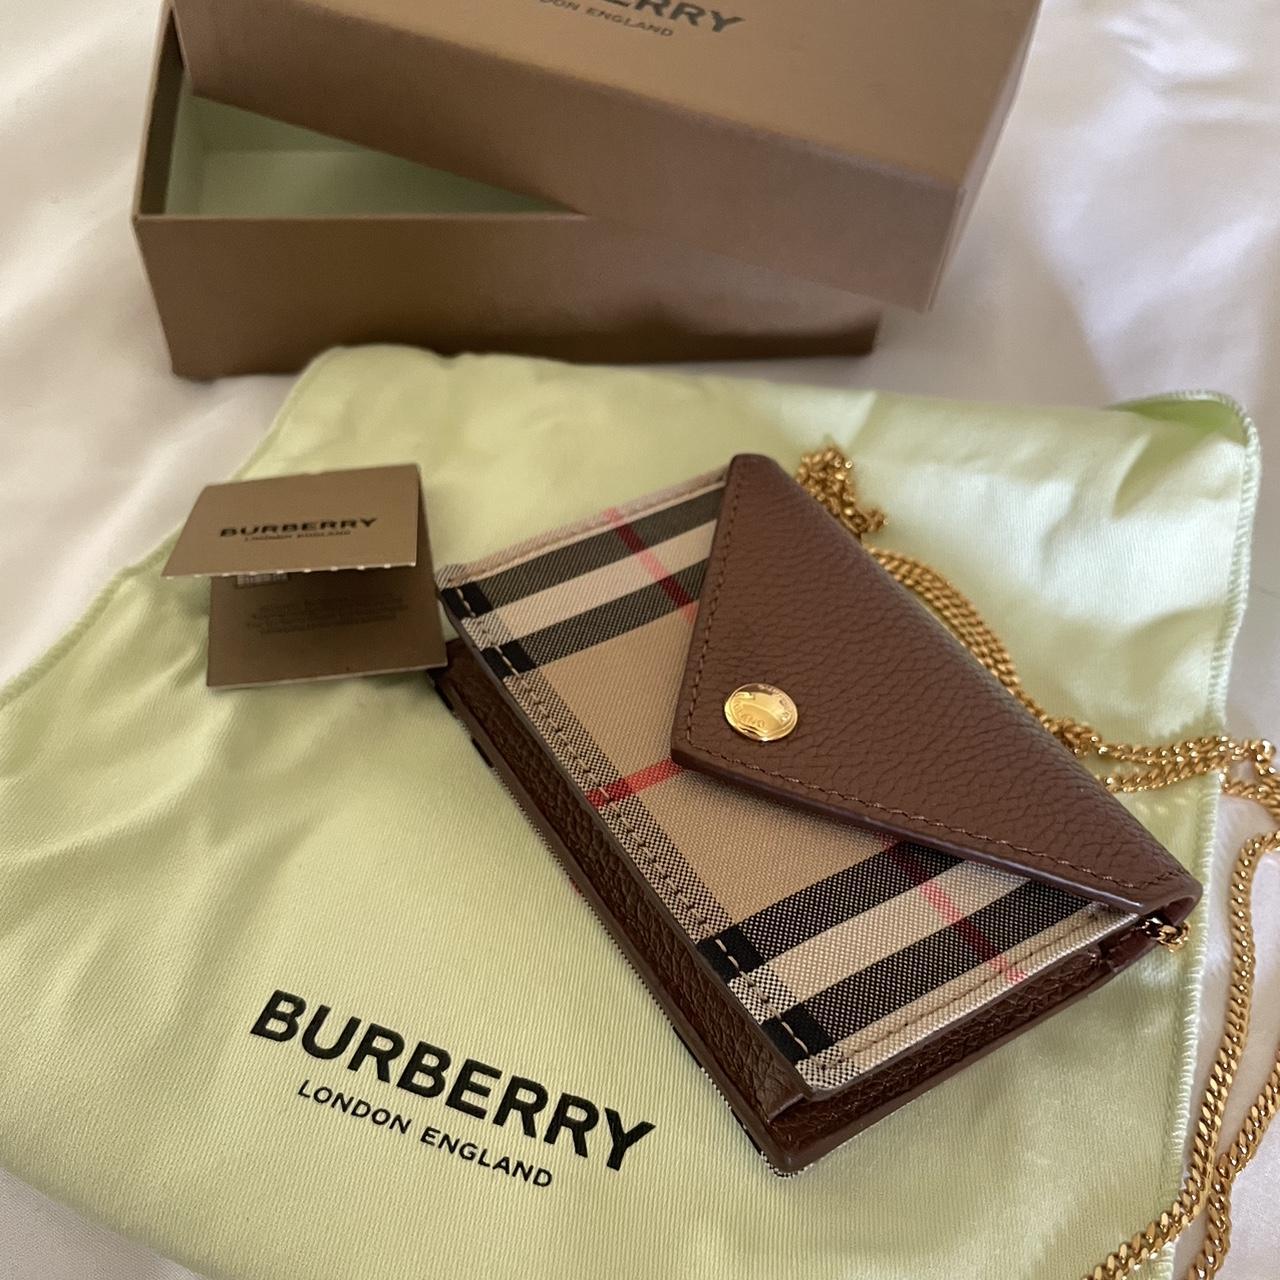 New and used Burberry bags for sale | Facebook Marketplace